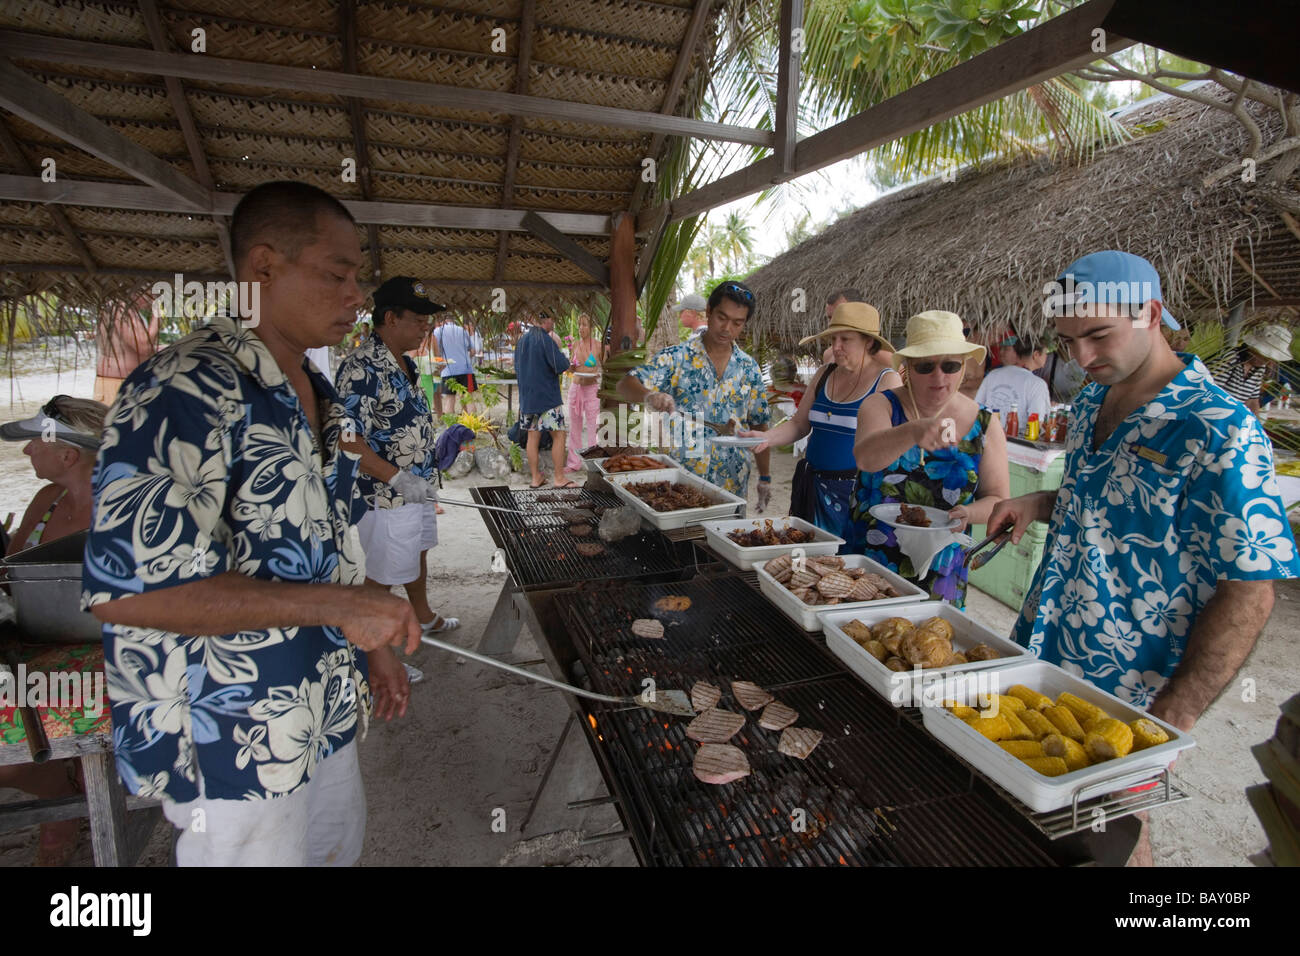 https://c8.alamy.com/comp/BAY0BP/beach-barbeque-lunch-at-a-beach-party-for-passengers-of-the-cruiseship-BAY0BP.jpg